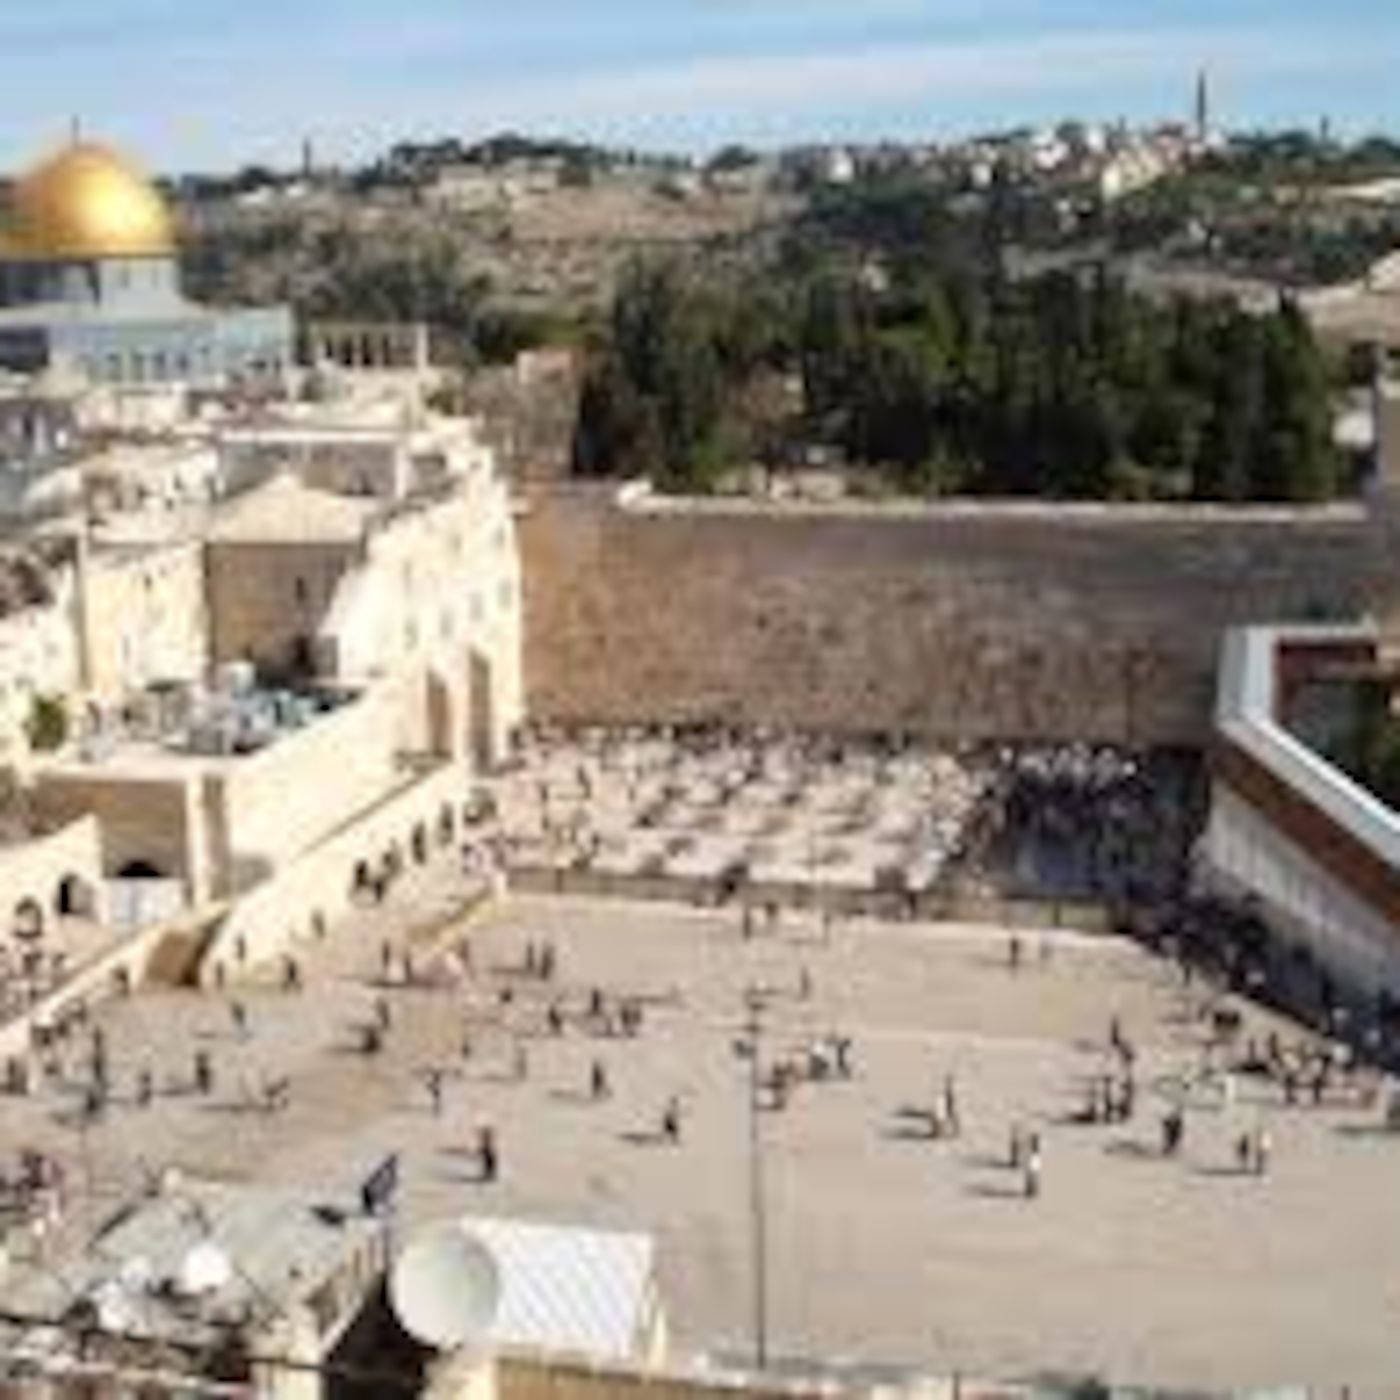 Episode 851: Jews, Catholics, Palestinians and the Temple in Jerusalem